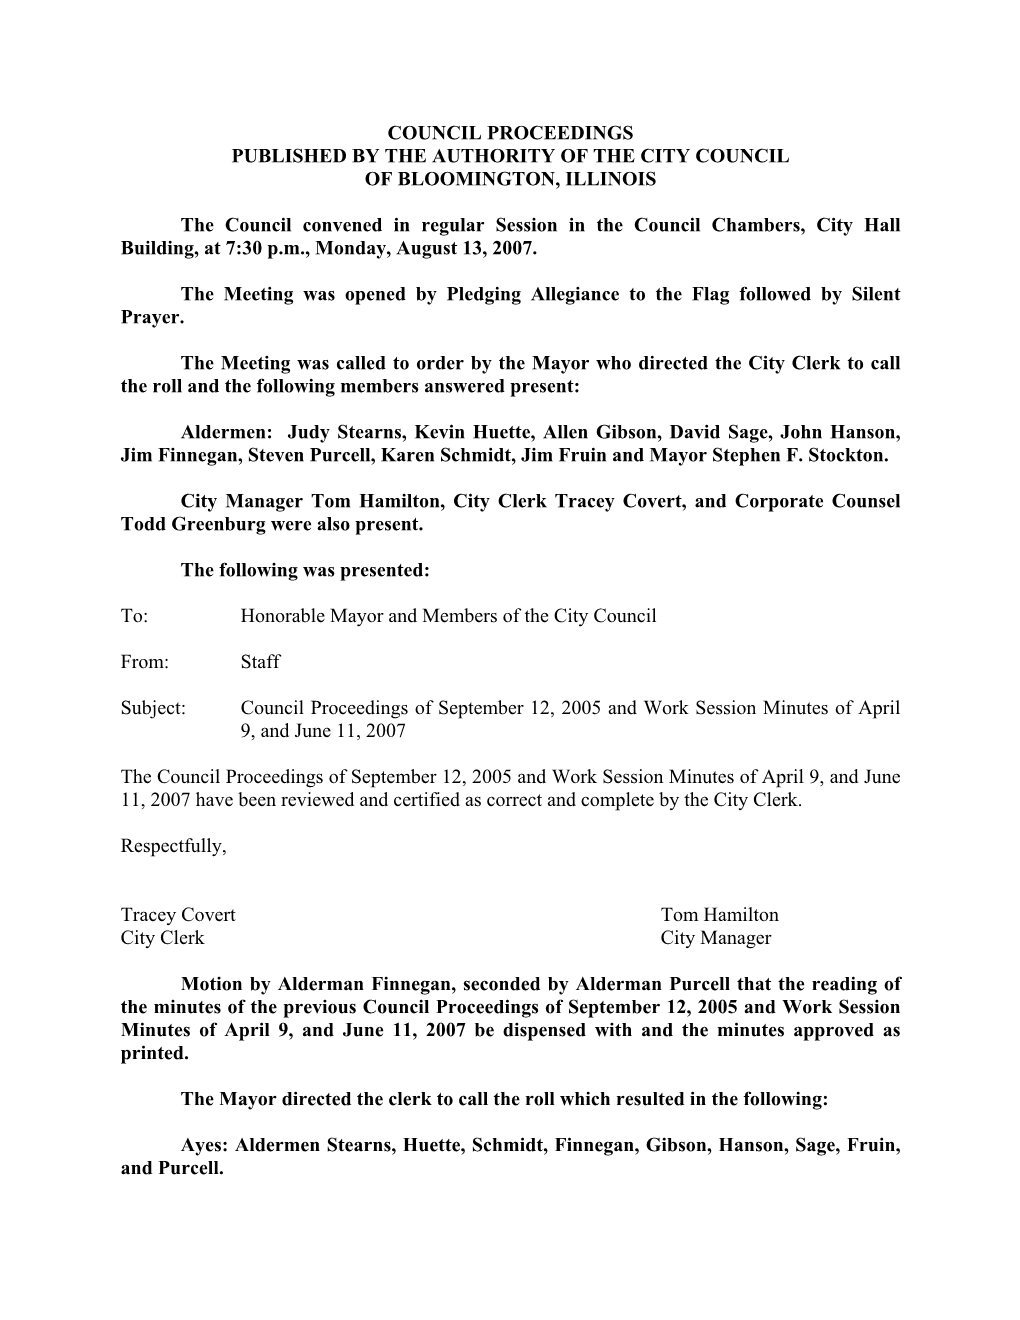 City Council Proceedings for August 13, 2007